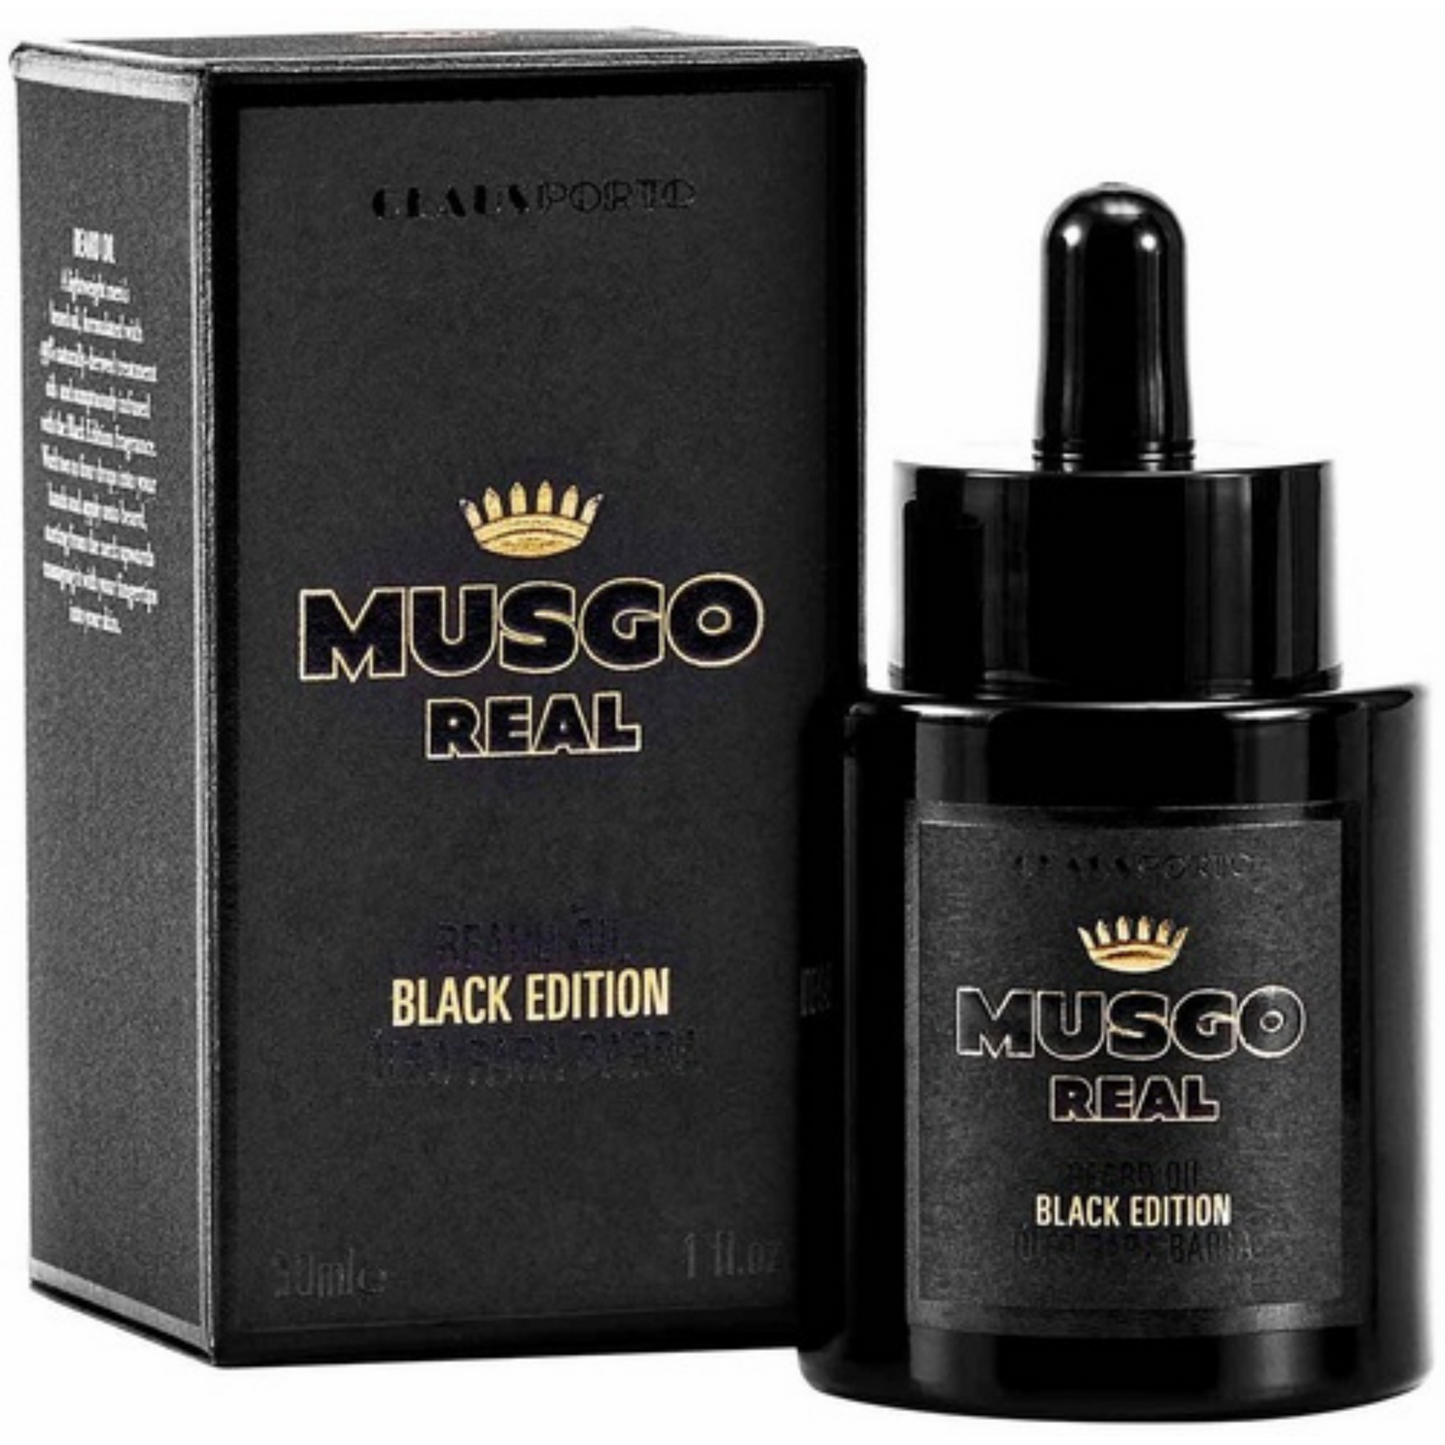 Primary Image of Black Edition Beard Oil